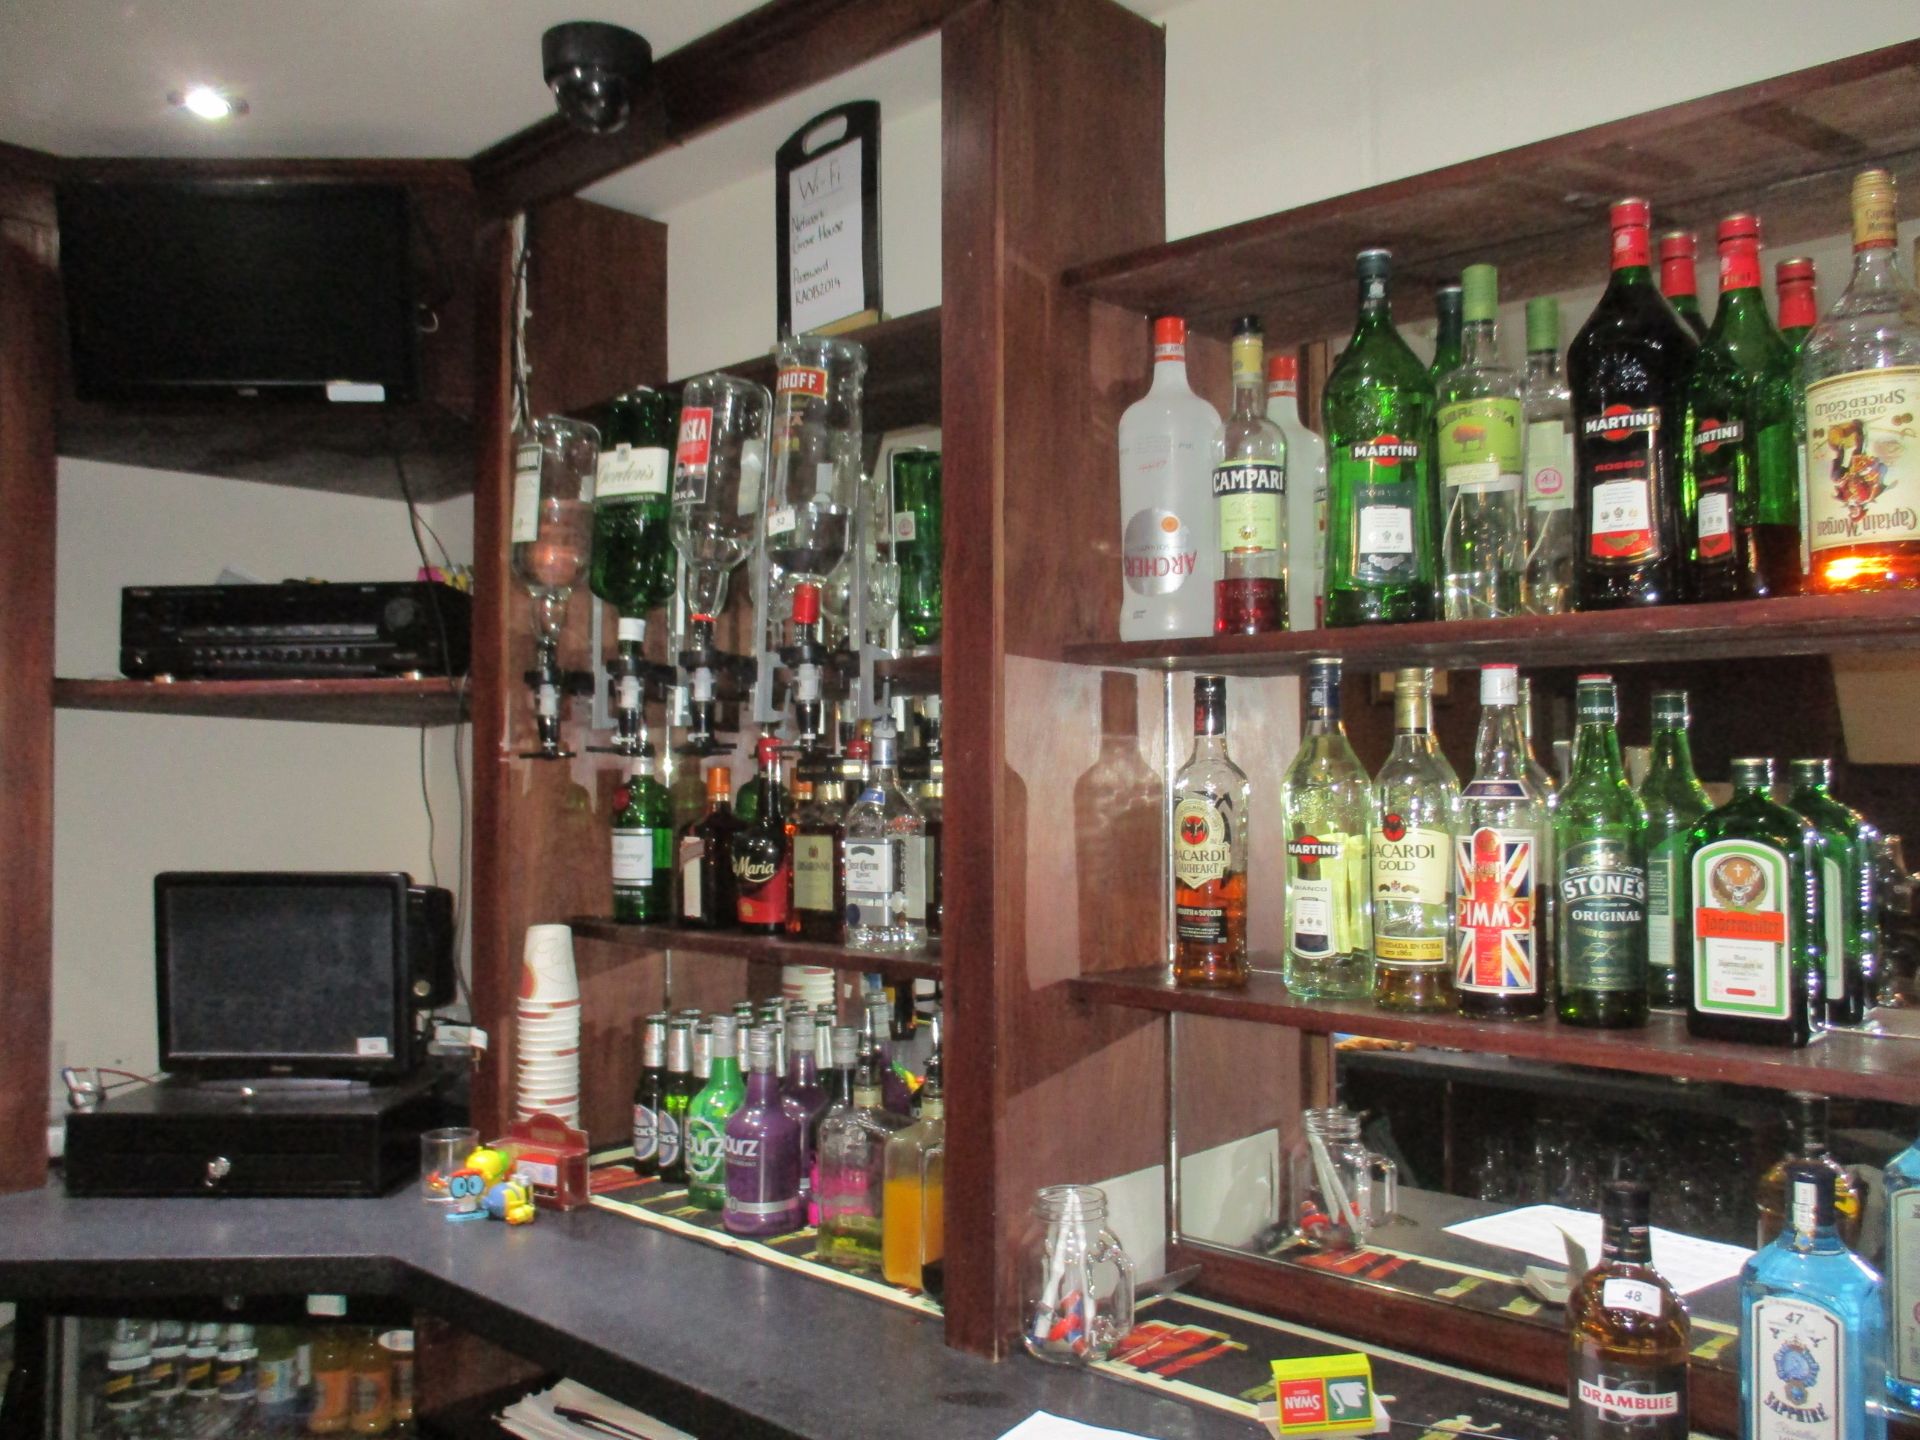 Contents to back of bar - 22 part bottles of spirits and liqueurs, Bacardi, various whiskies, vodka,